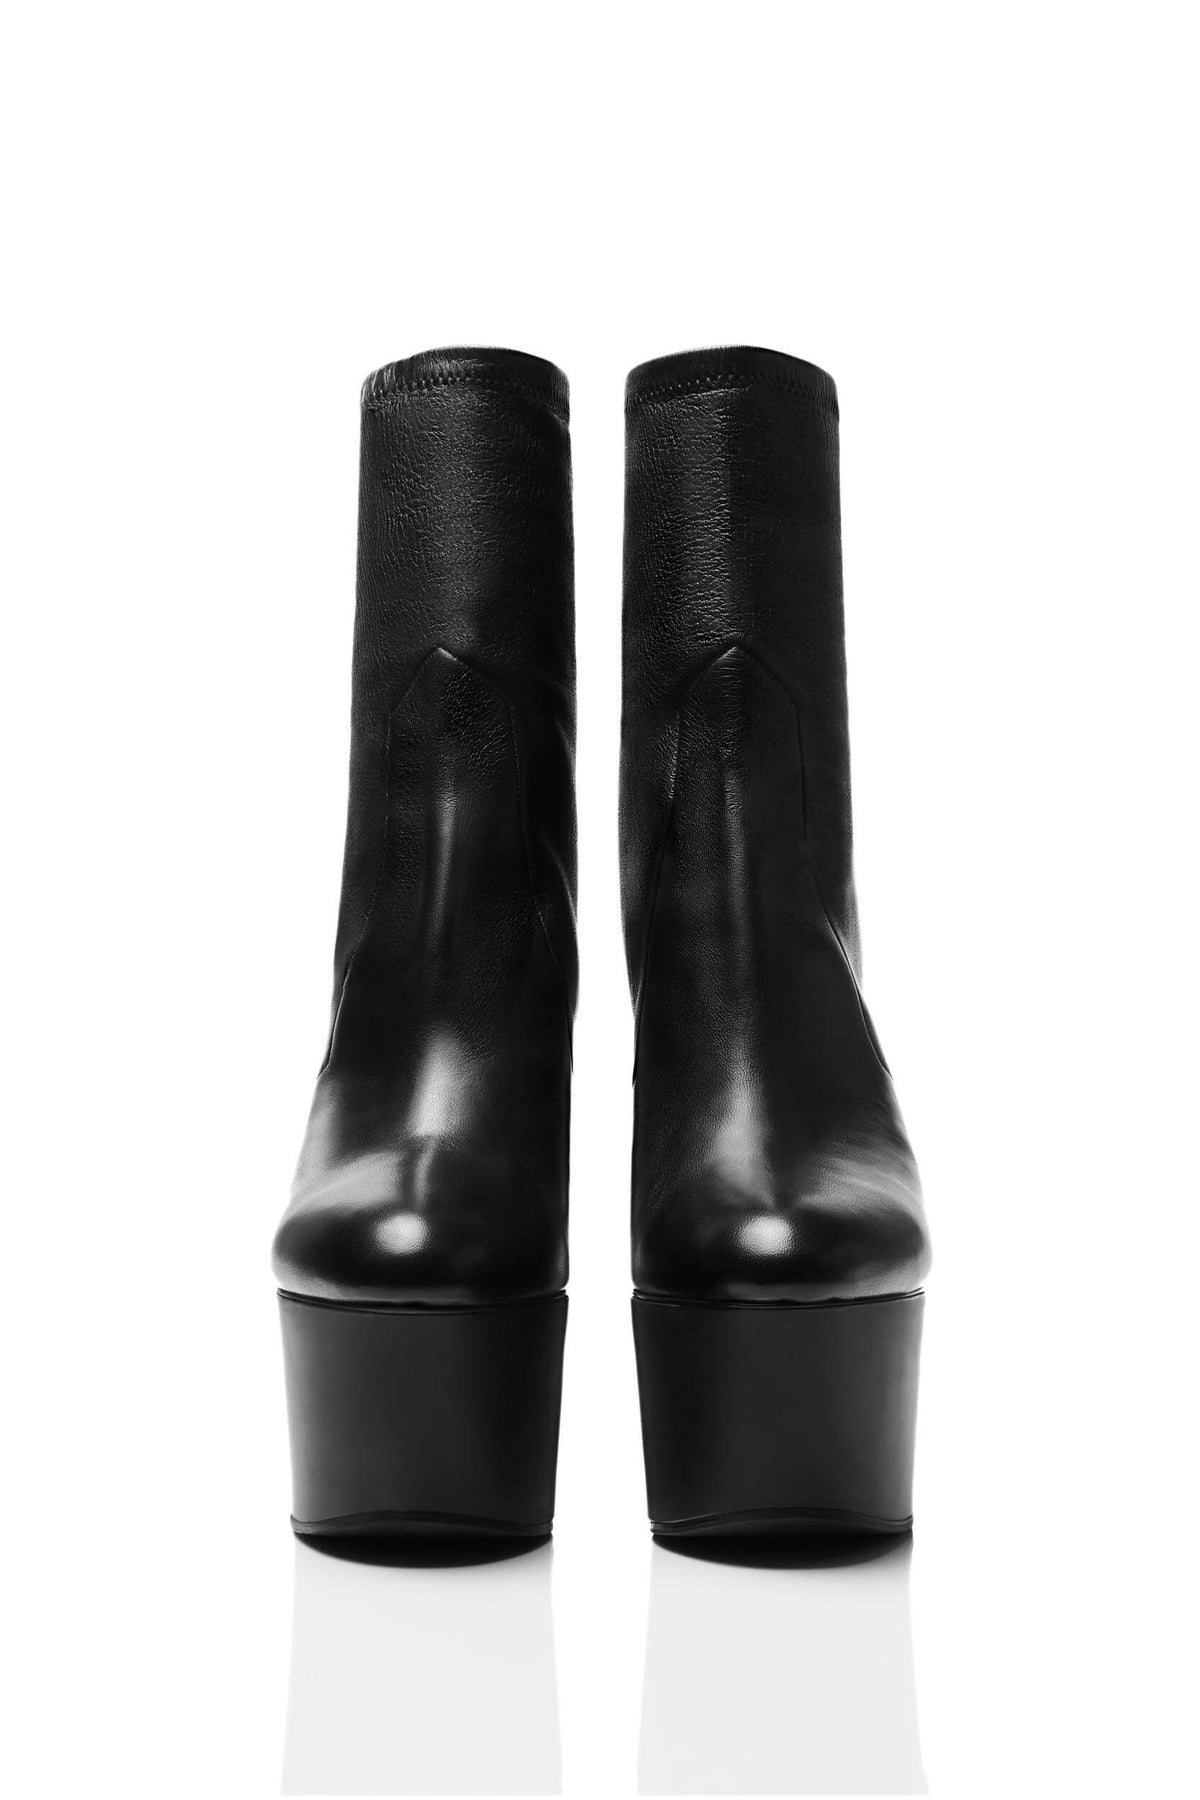 HAIKI 851 – Stretch pull-on platform boot with chic, almond shape toe. Made of Nappa leather in black. 